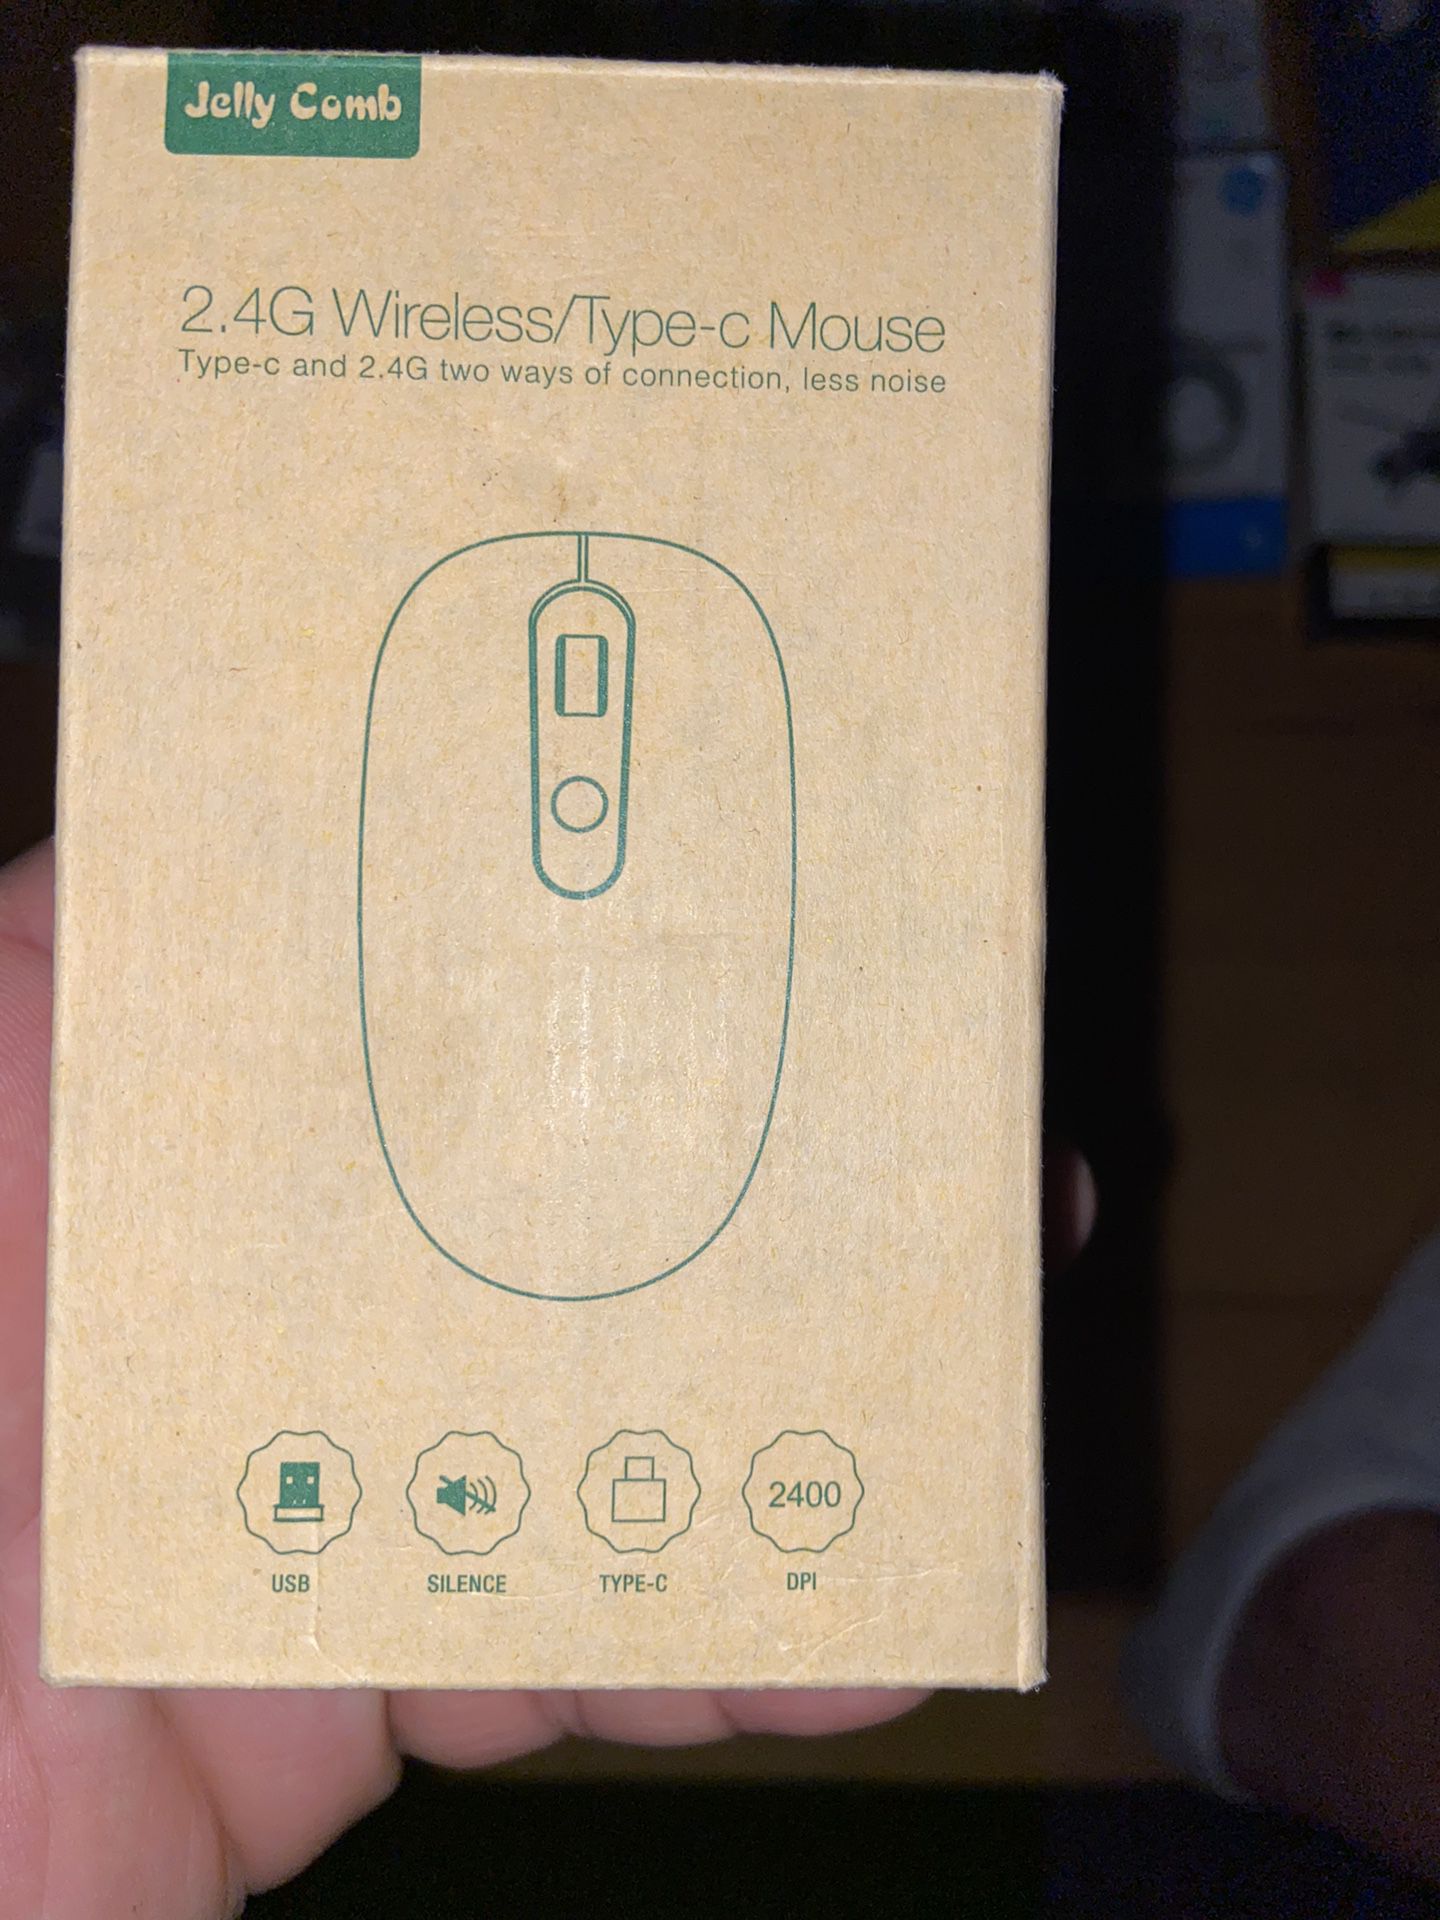 BRAND NEW-JELLY COMB 2.4G WIRELESS /TYPE-C MOUSE H